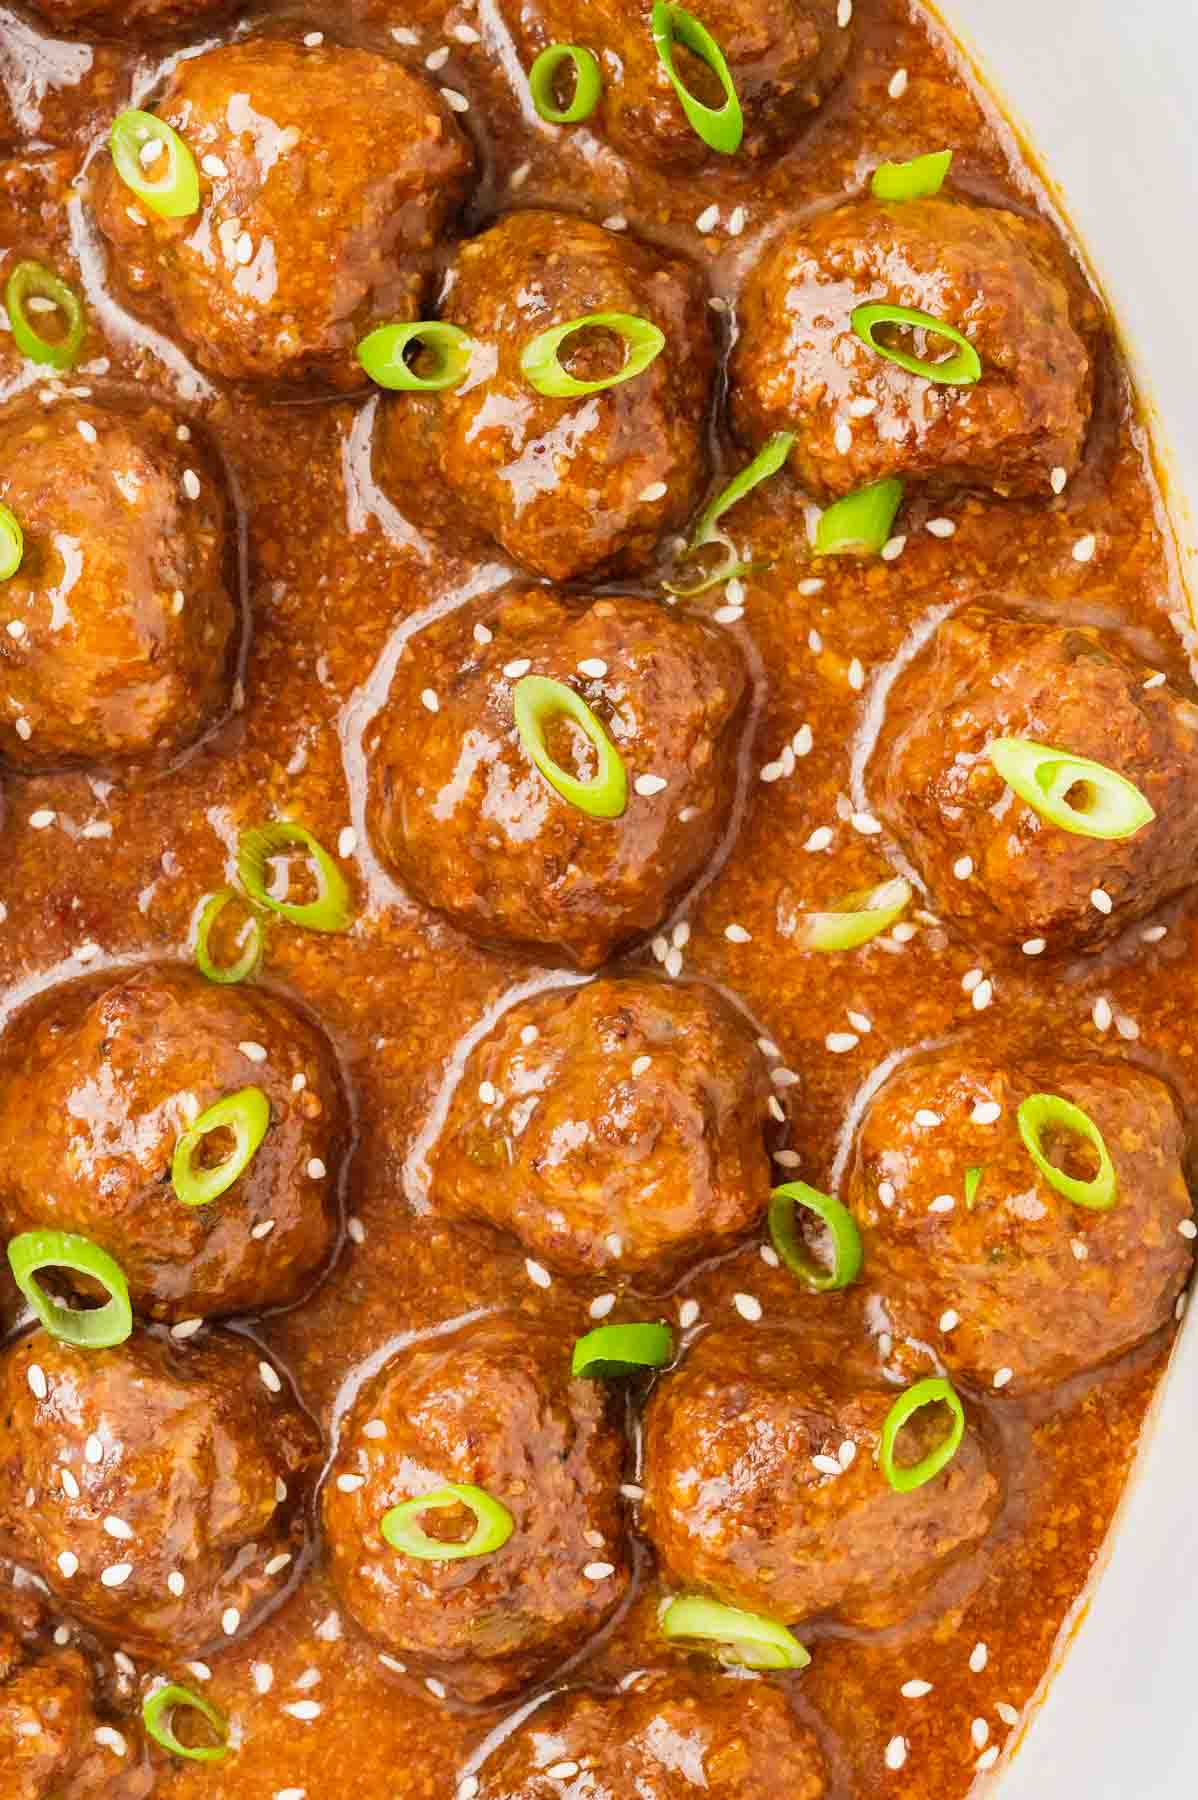 Crock Pot Teriyaki Meatballs are homemade slow cooker beef meatballs with a sweet and savory sauce containing pineapple, soy sauce and brown sugar.